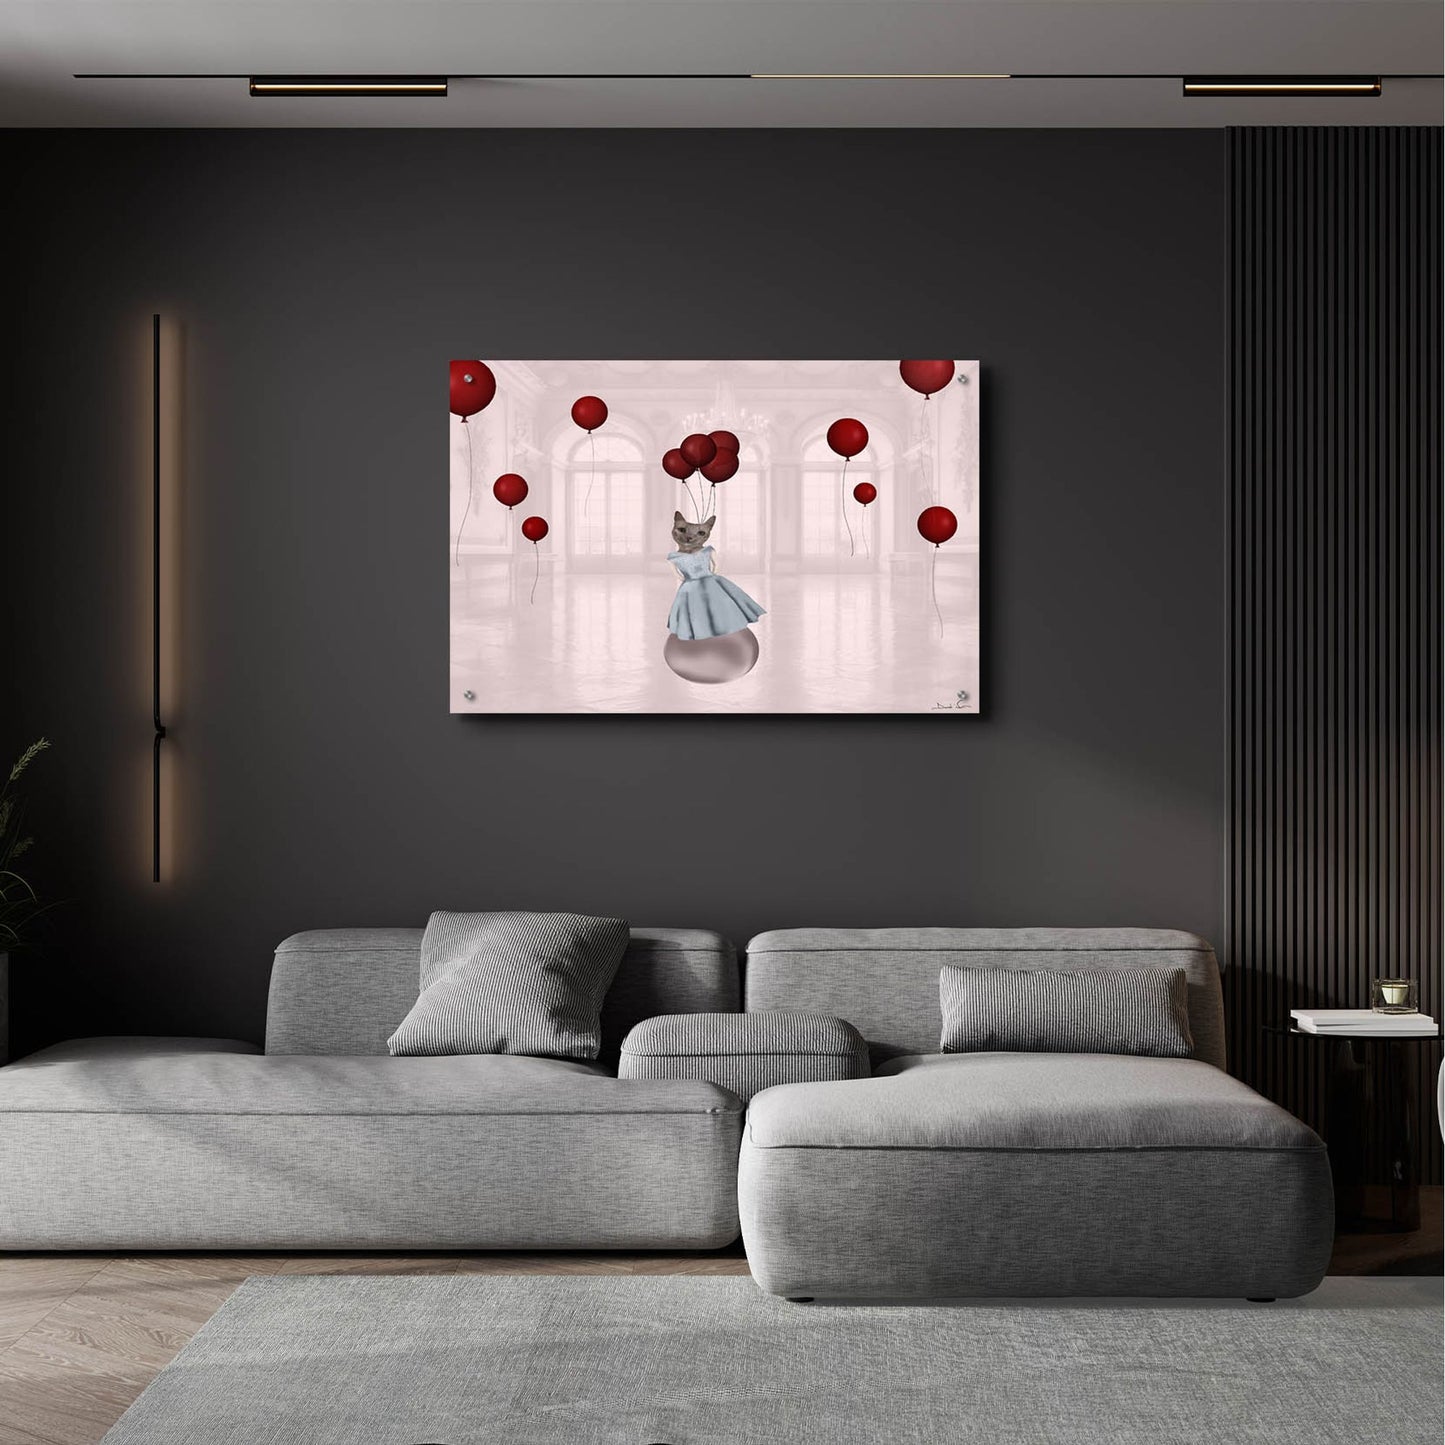 Epic Art 'Ball With Balloons' by Daniela Nocito, Acrylic Glass Wall Art,36x24